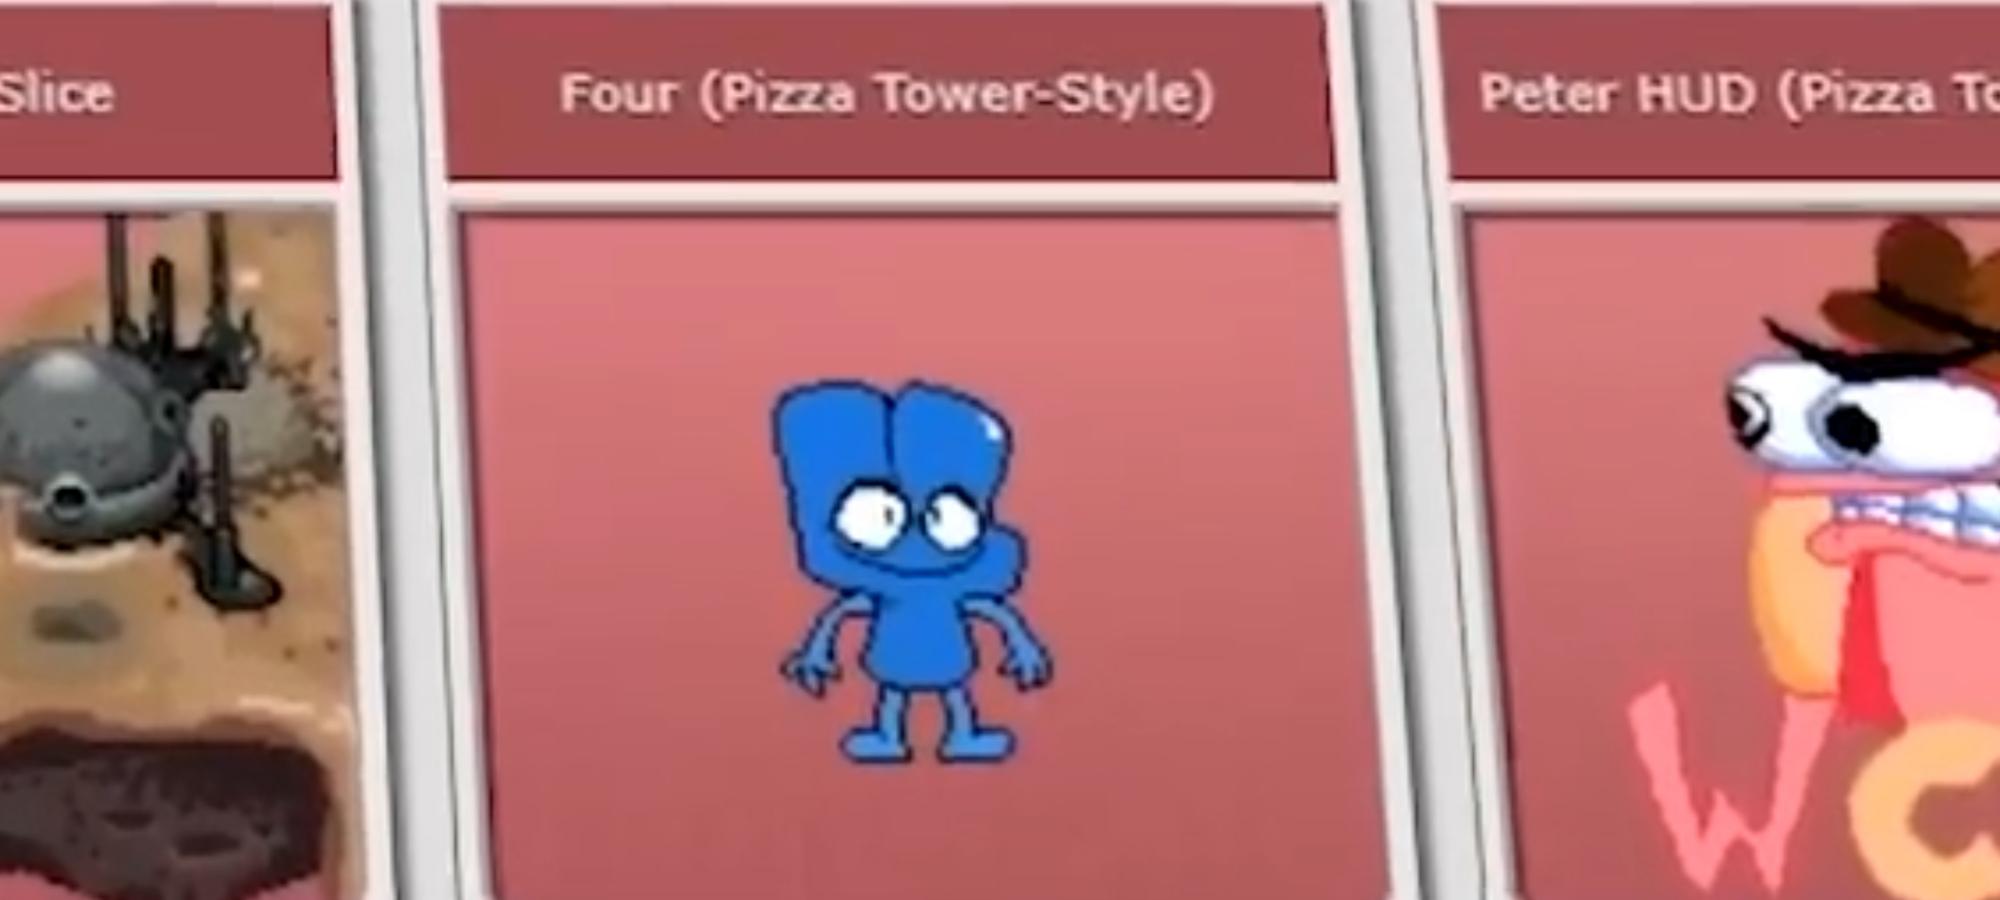 Pizza Tower: A Slice Above. Platformers are the pizza of video game…, by  BeeOhBeeHee